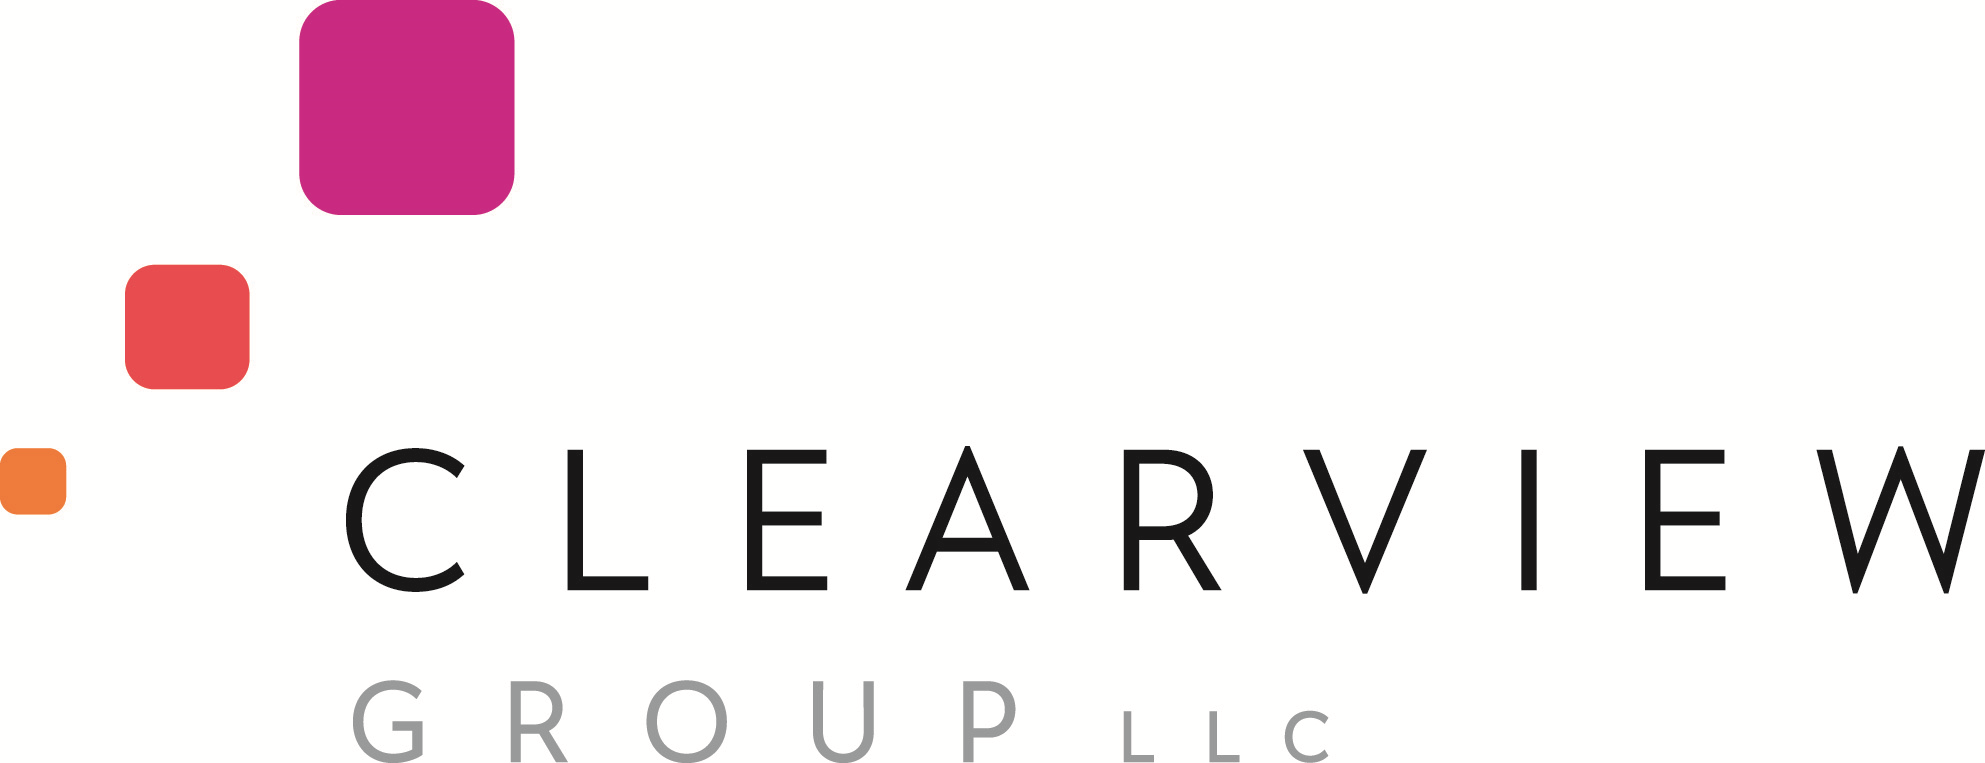 Clearview Group, LLC logo